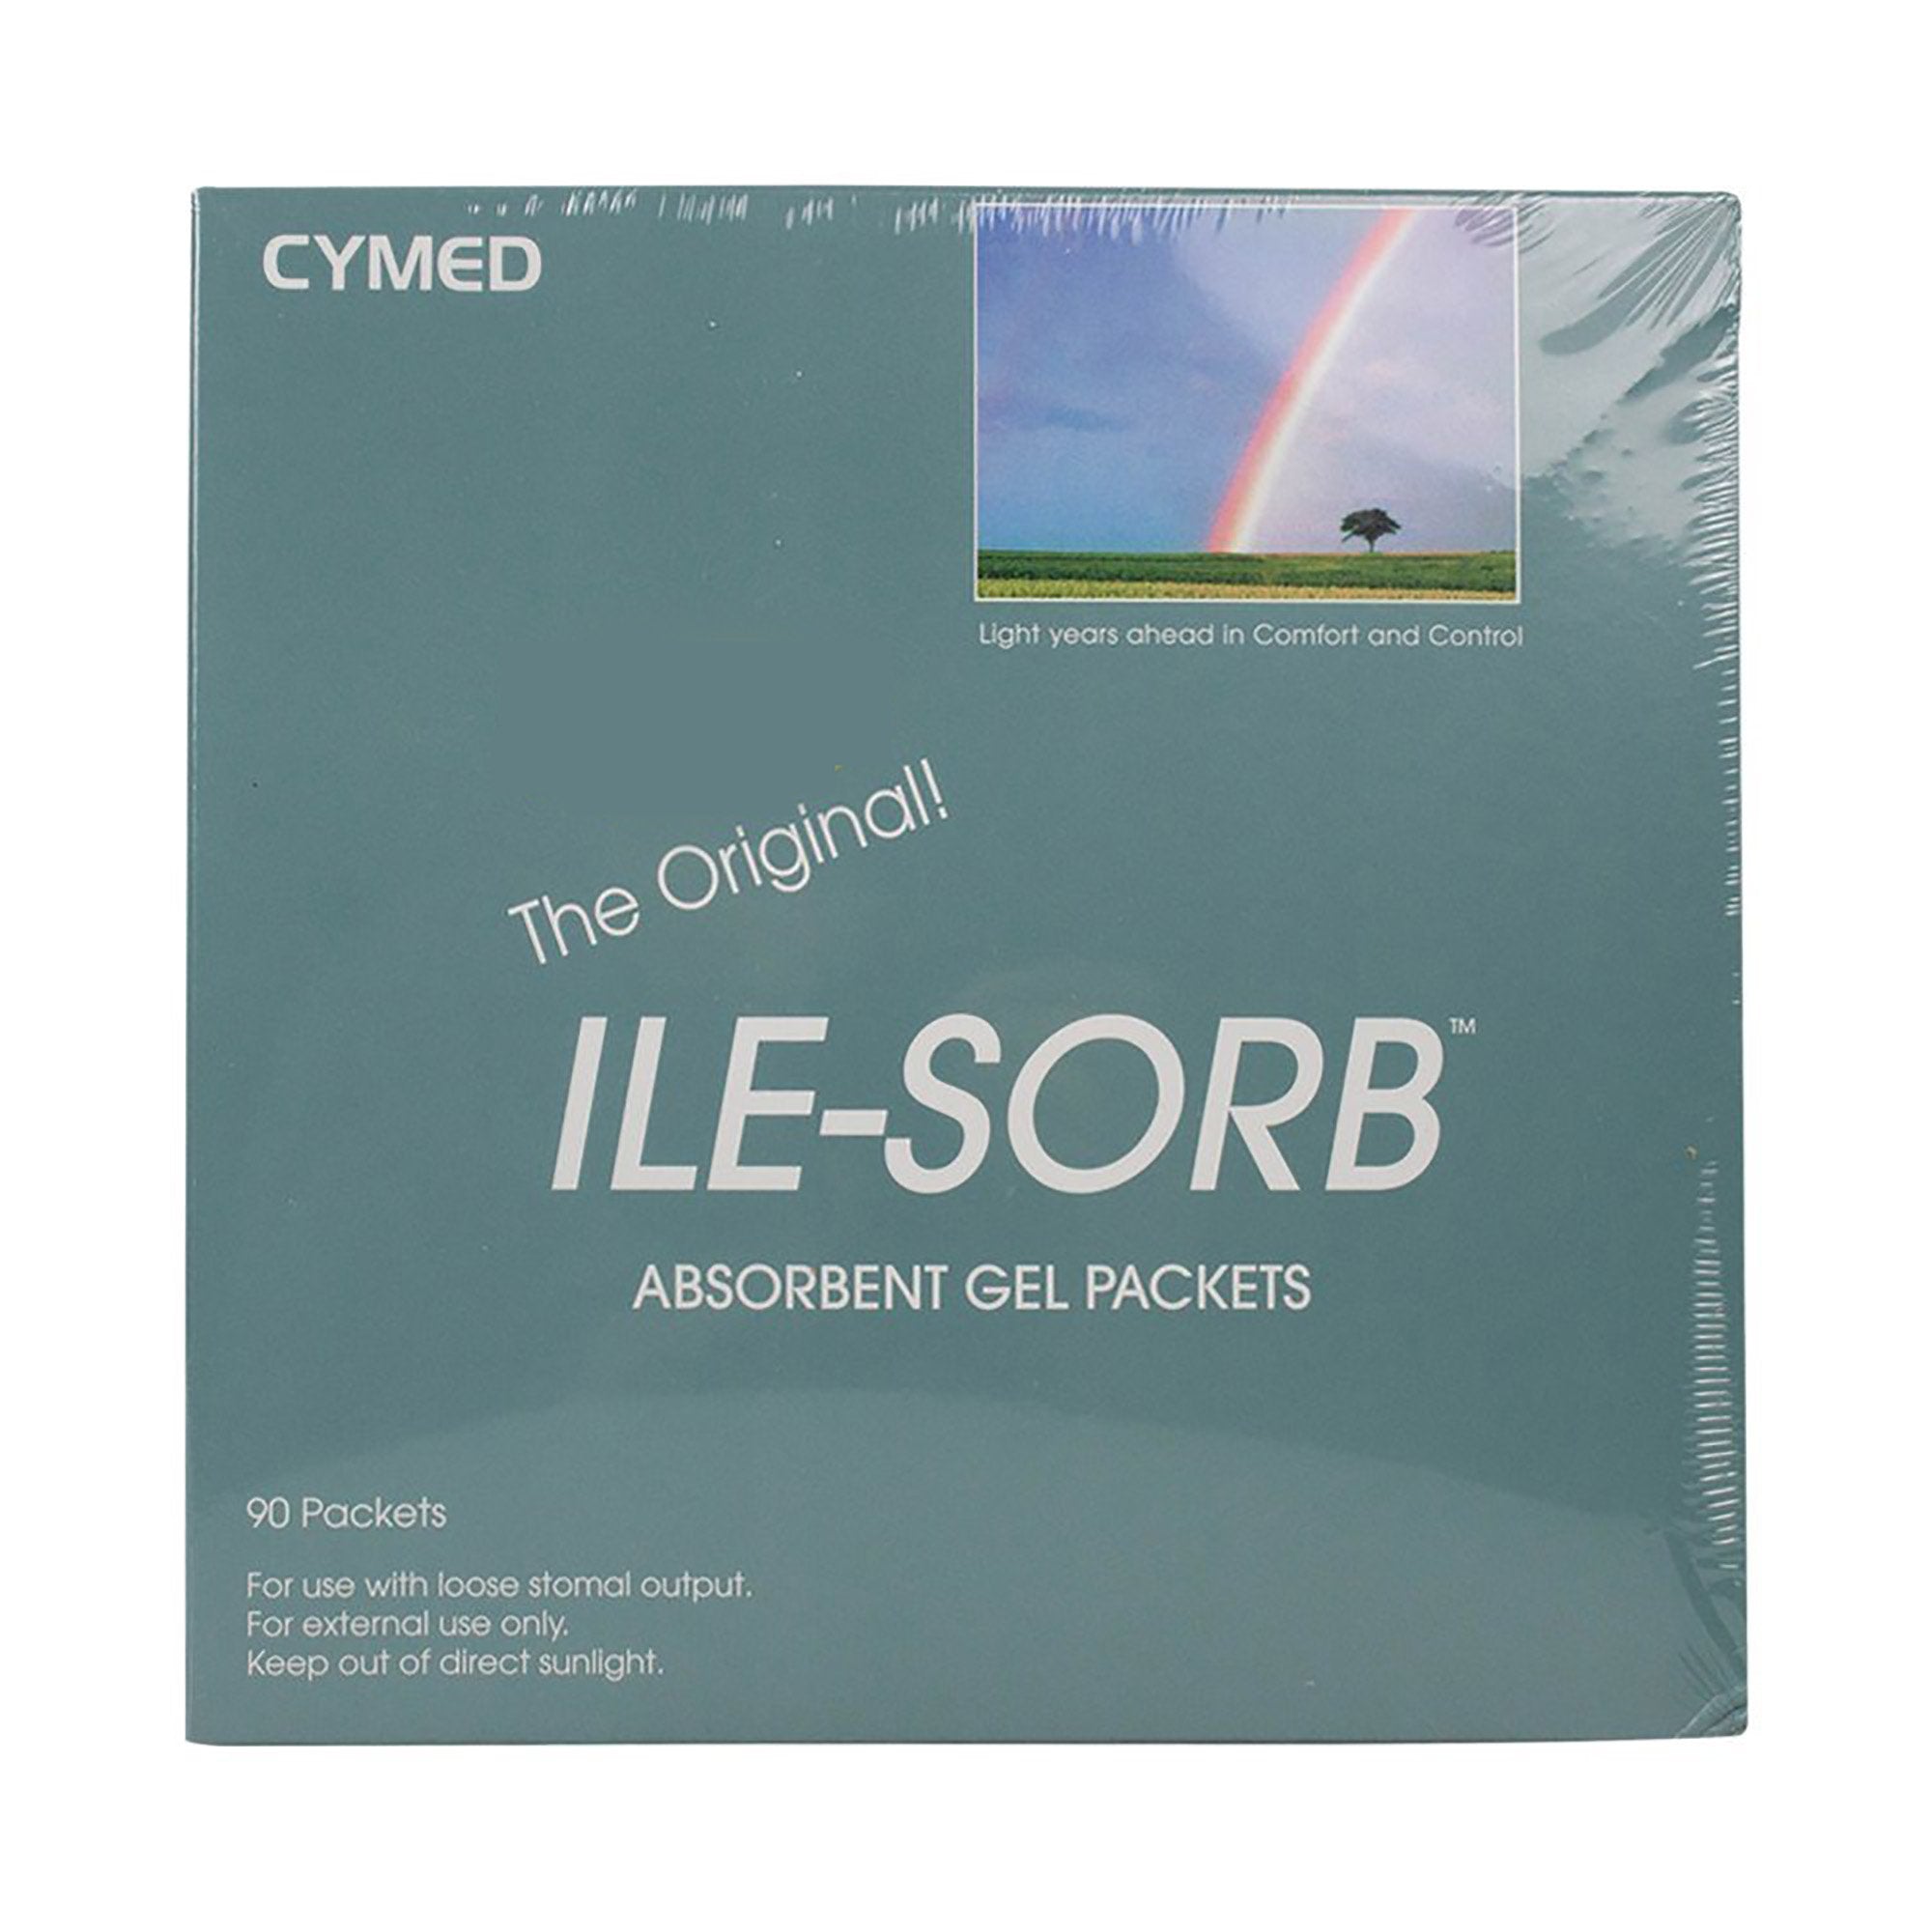 Absorbent Gel Packet The Original Ile-Sorb® 90 Packets